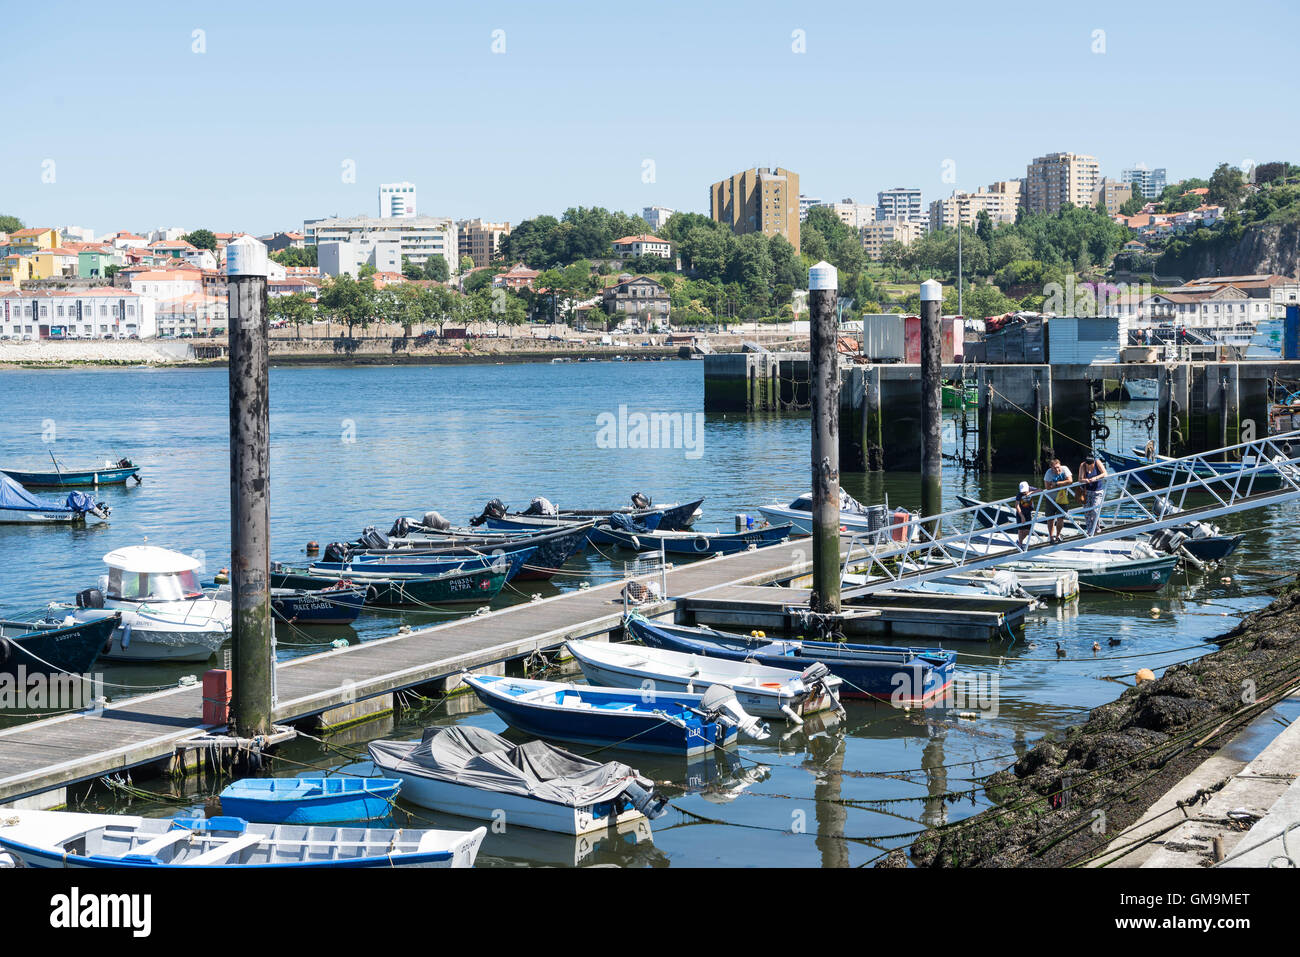 The marina near the small fishing village of Afurada, Portugal. The city of Porto visible on the other side of the river Douro. Stock Photo